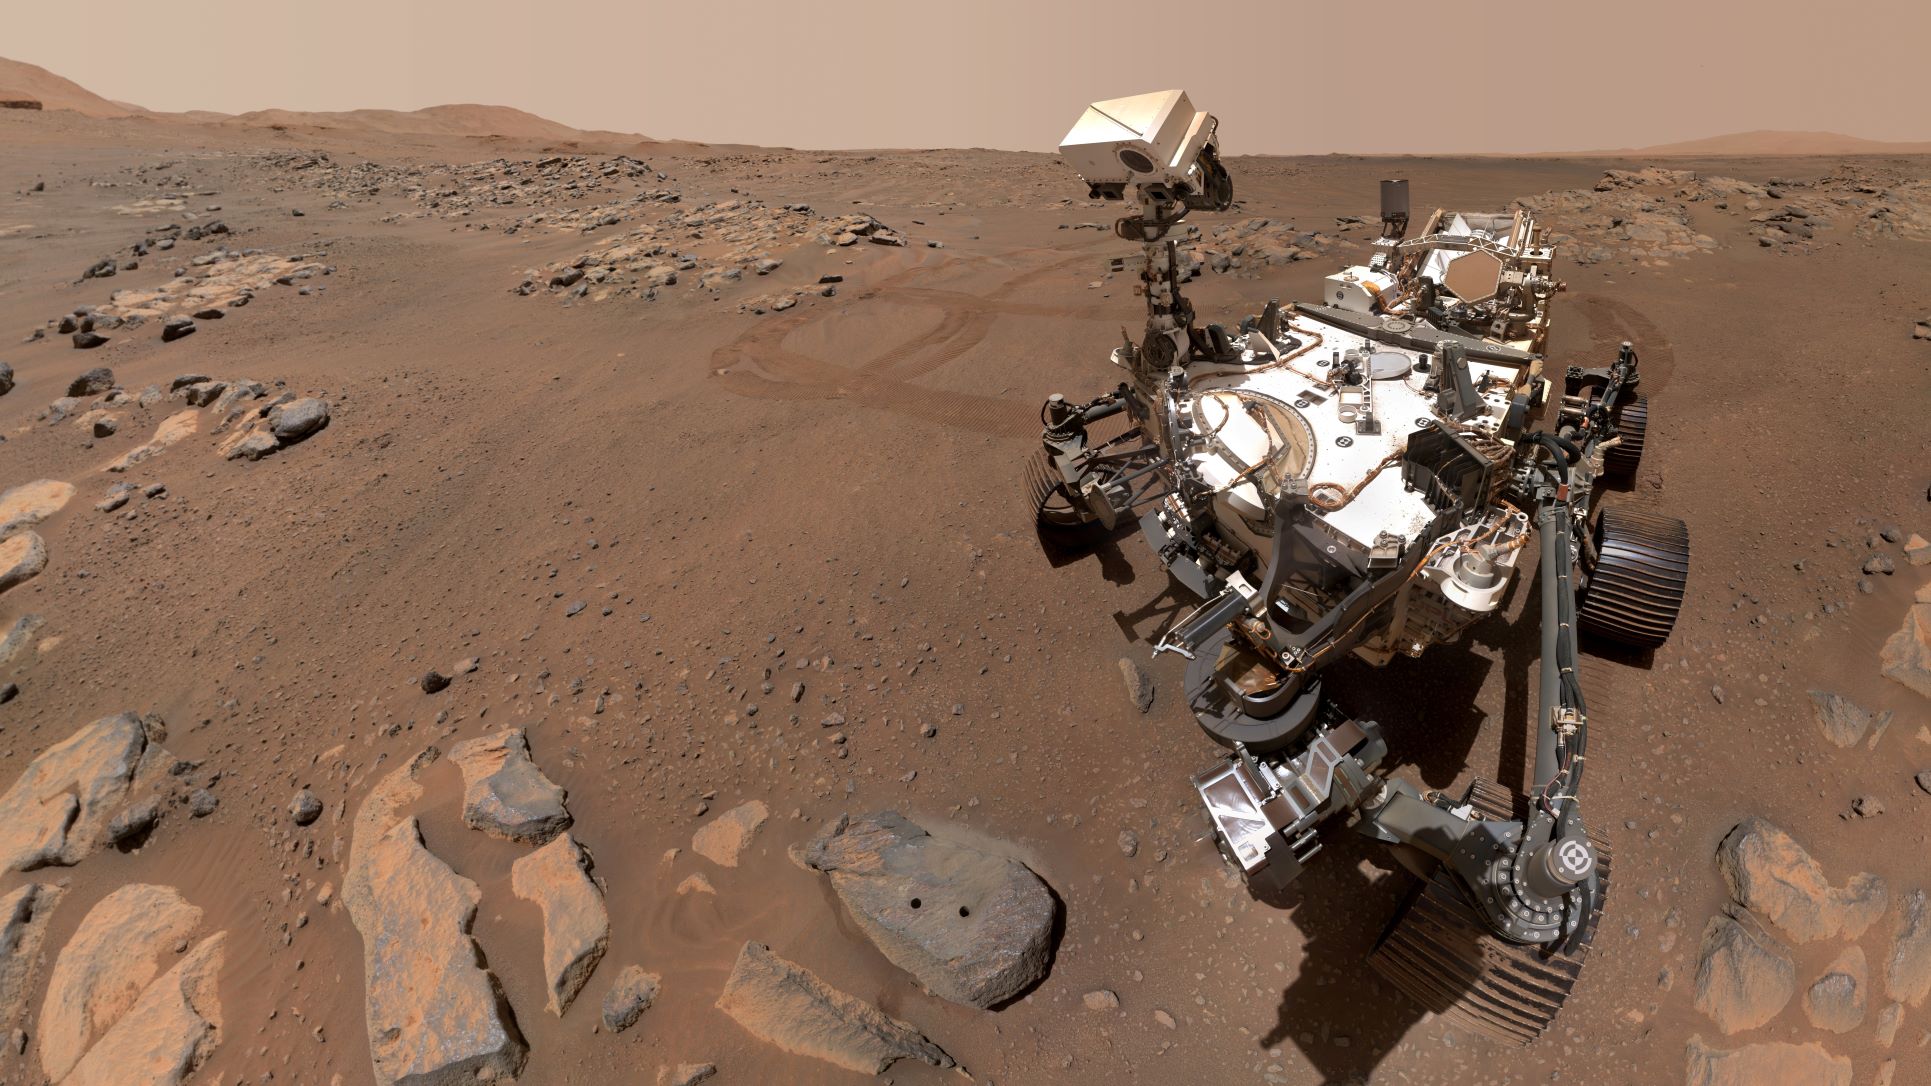 The Perseverance Mars rover on the red dusty surface of Mars taking a selfie